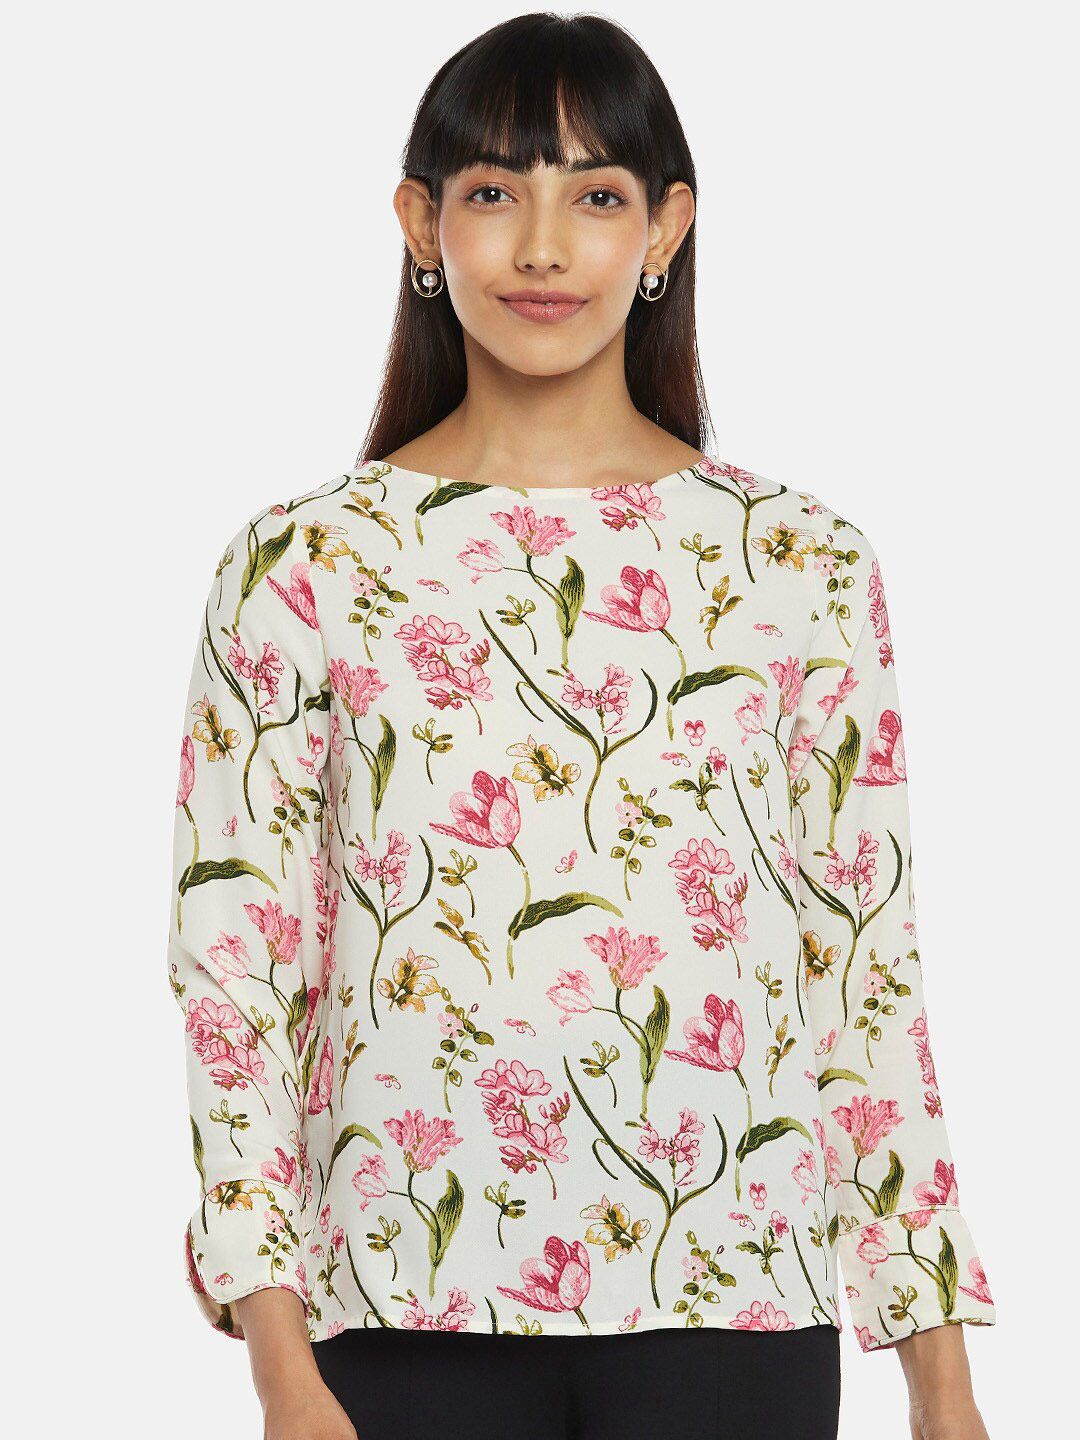 Annabelle by Pantaloons Women Off White & Pink Floral Print Top Price in India